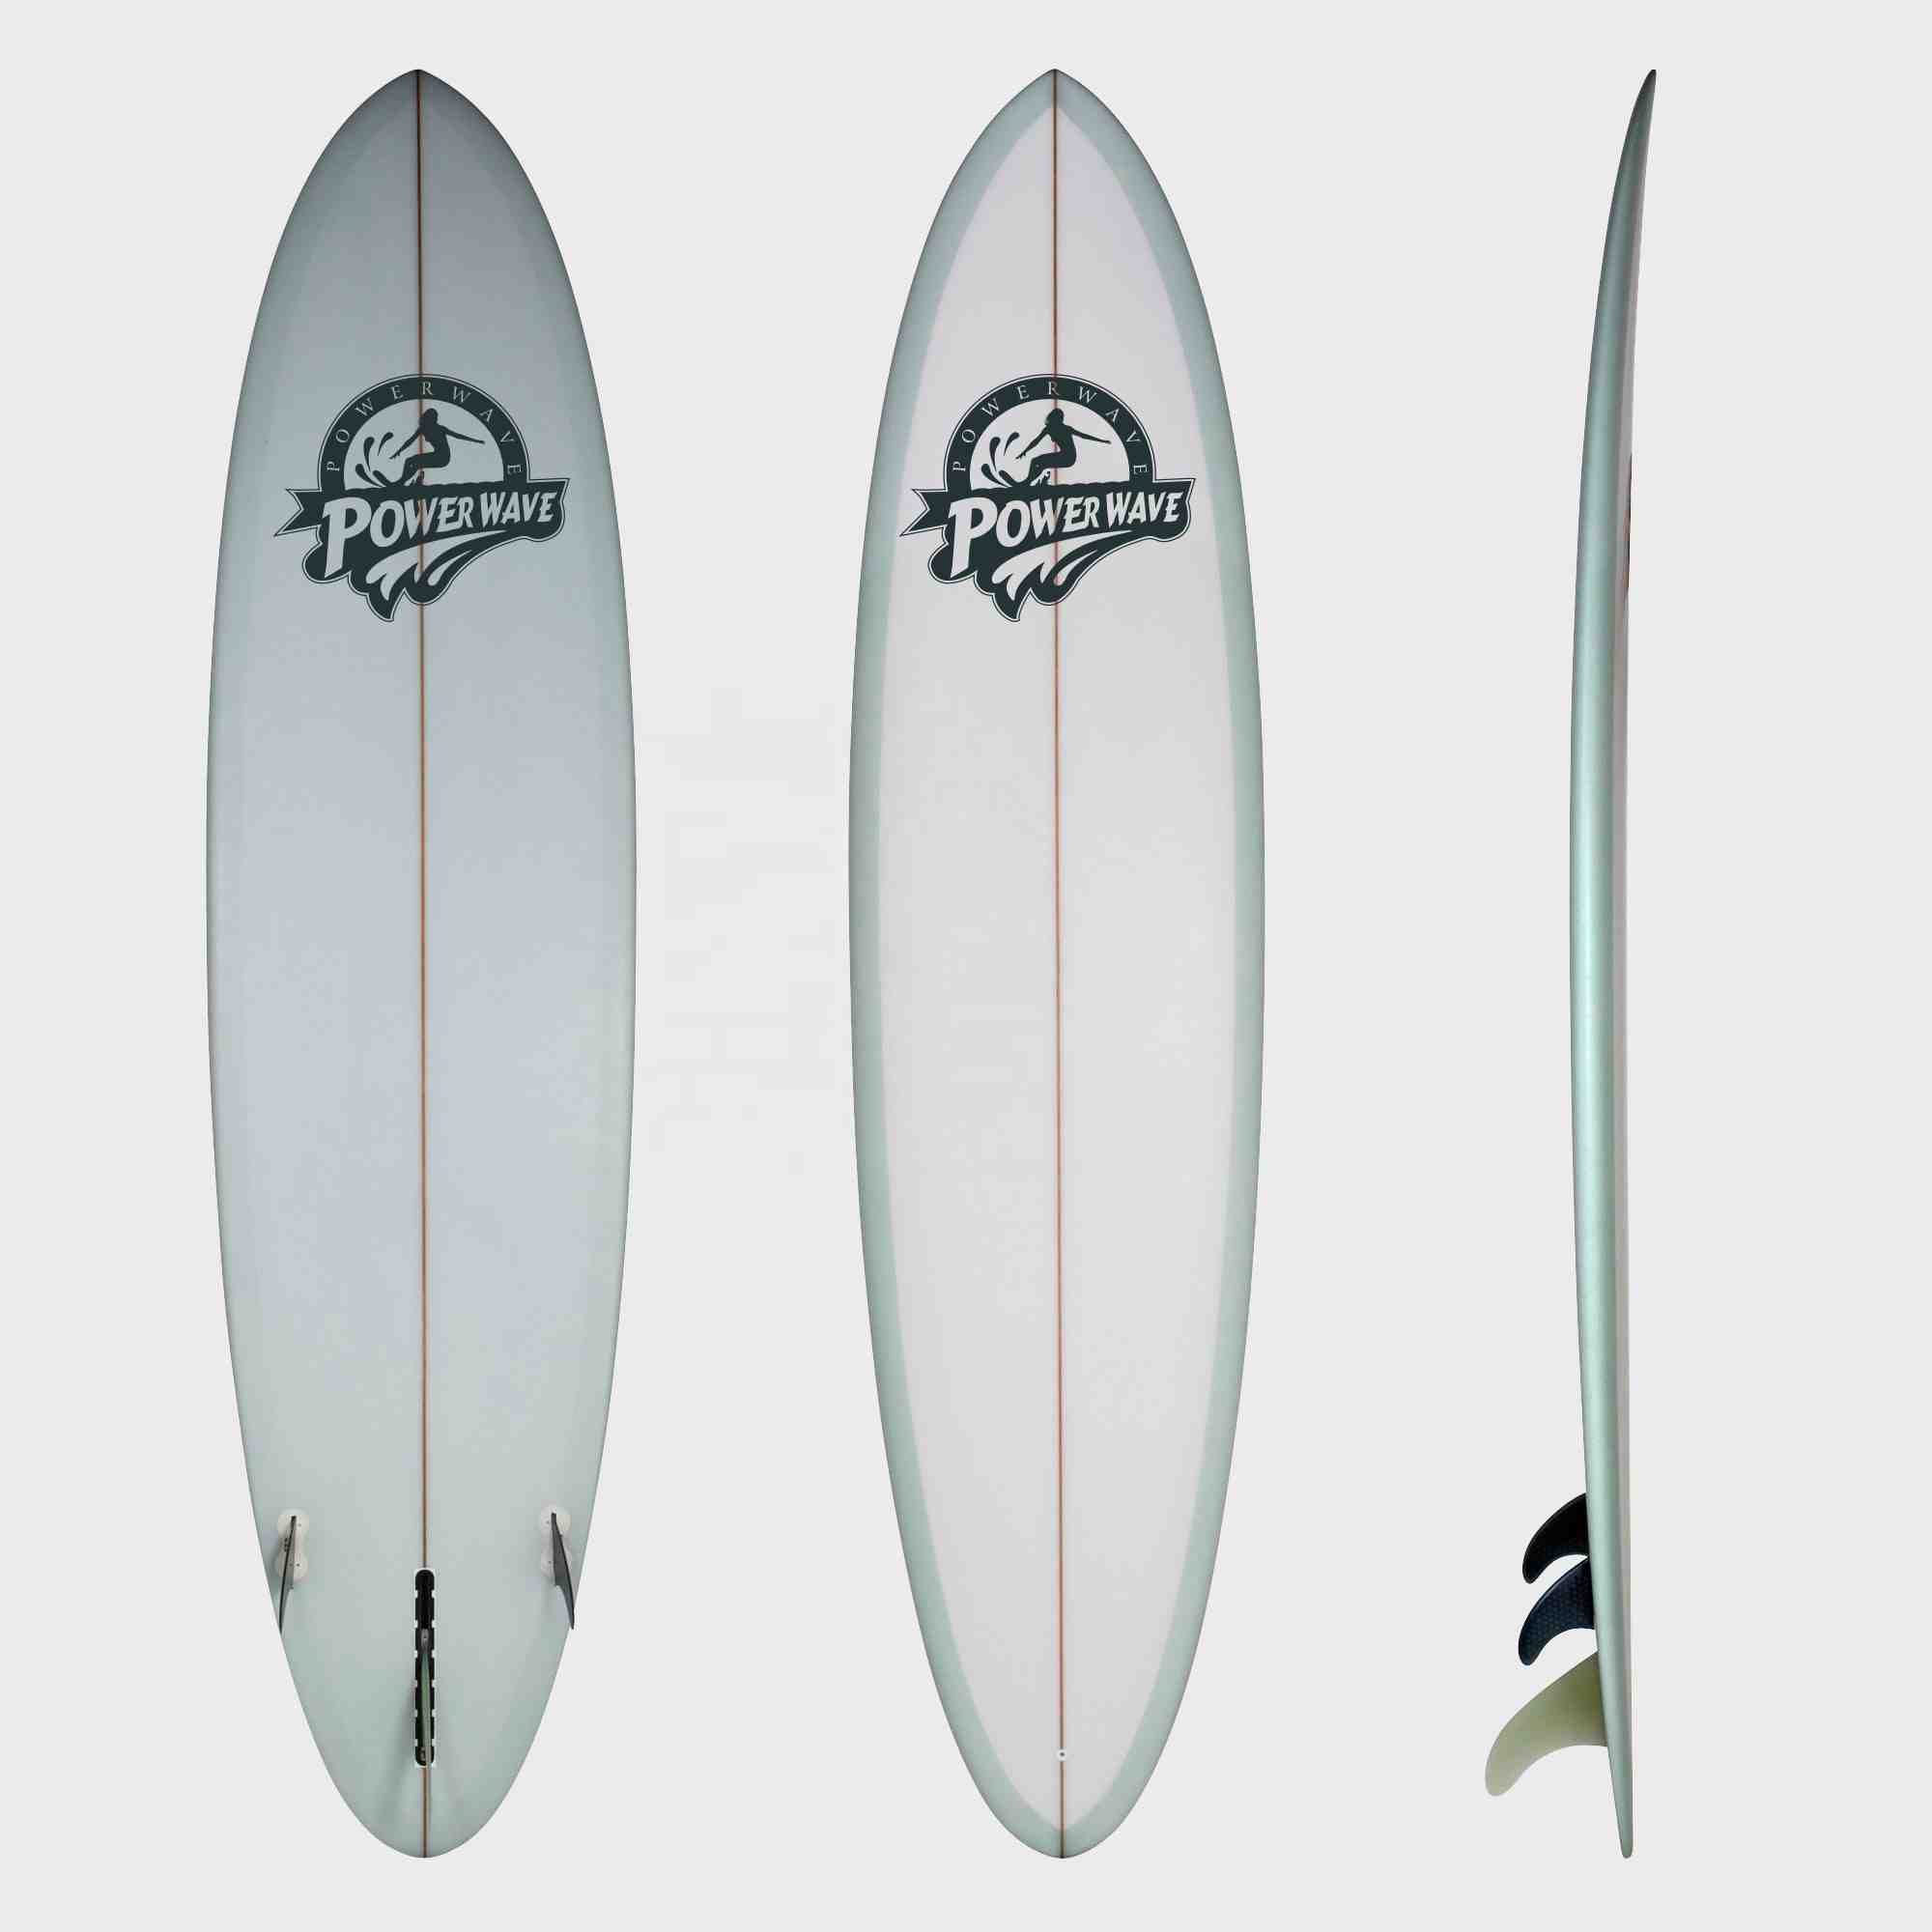 What happens to old surfboards?